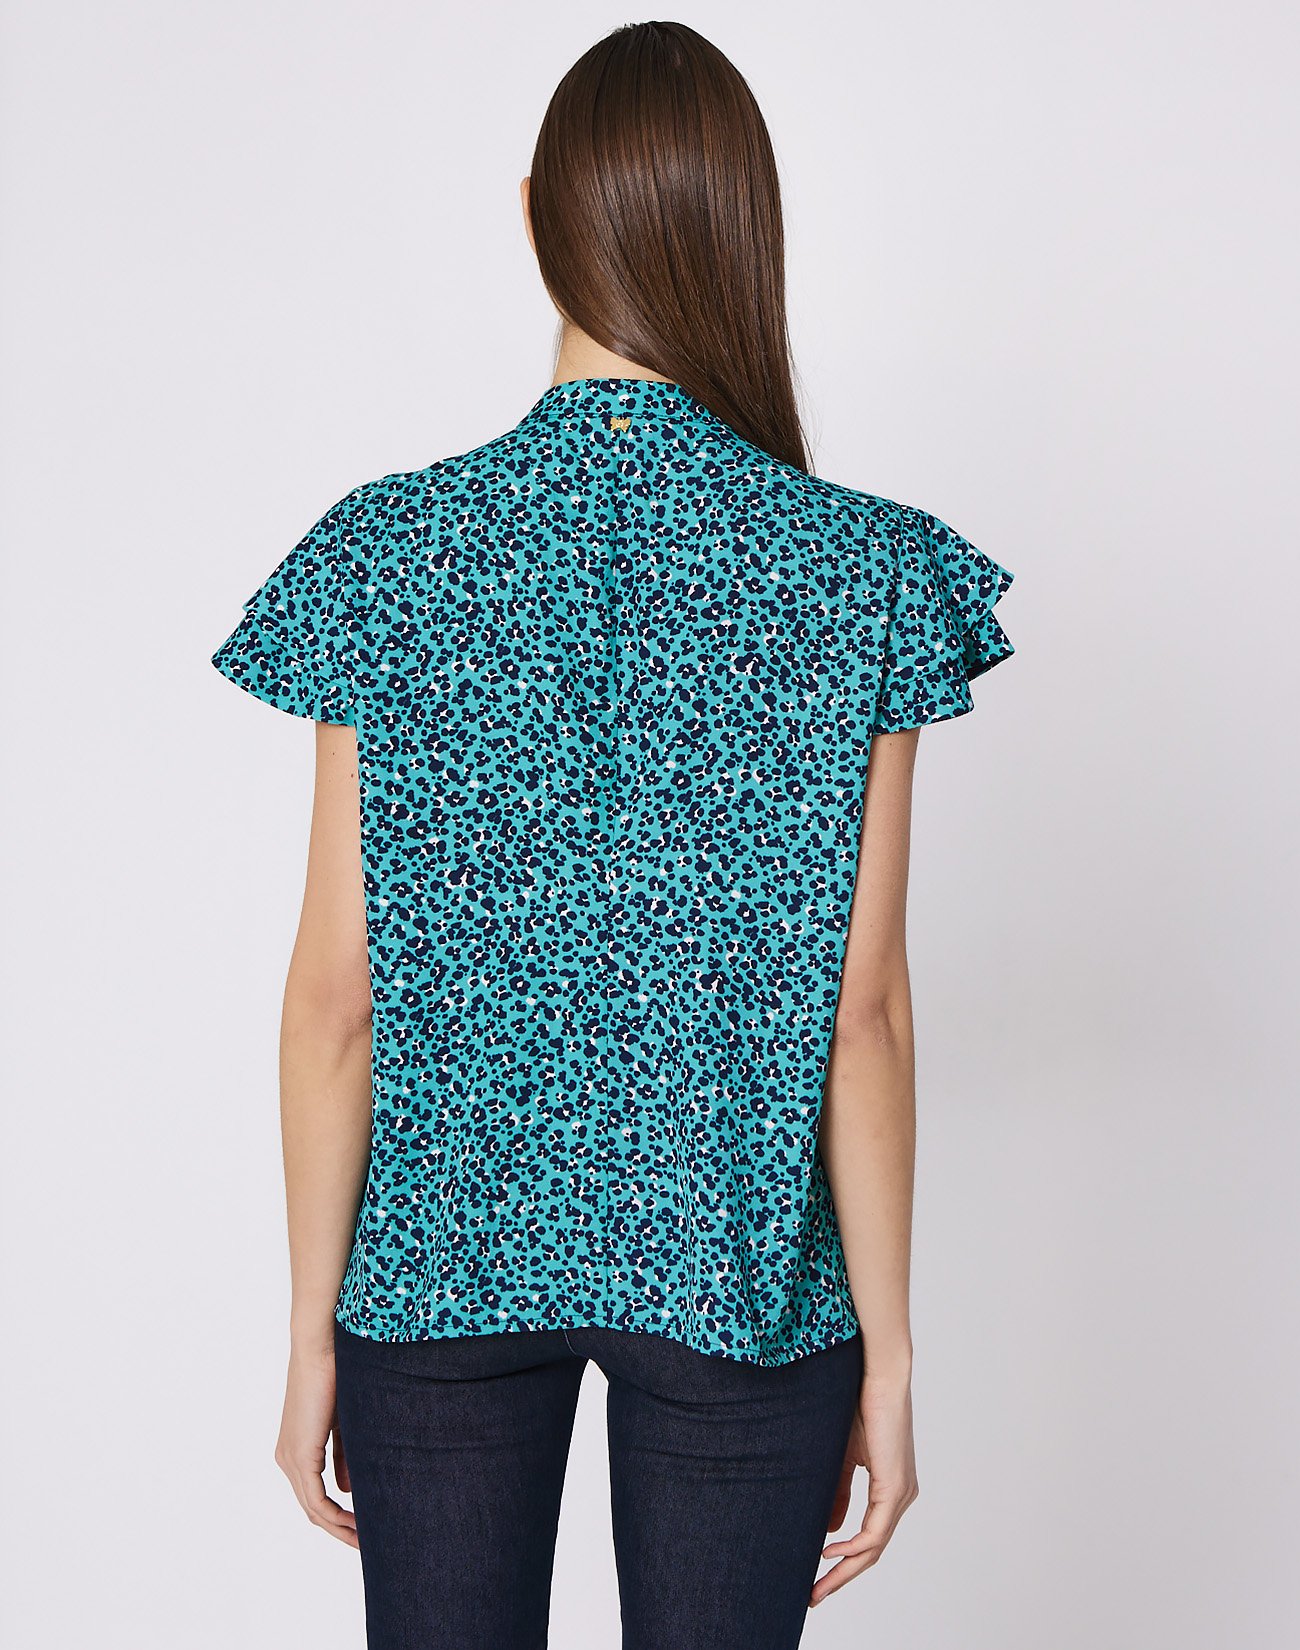 Printed top with double ruffles